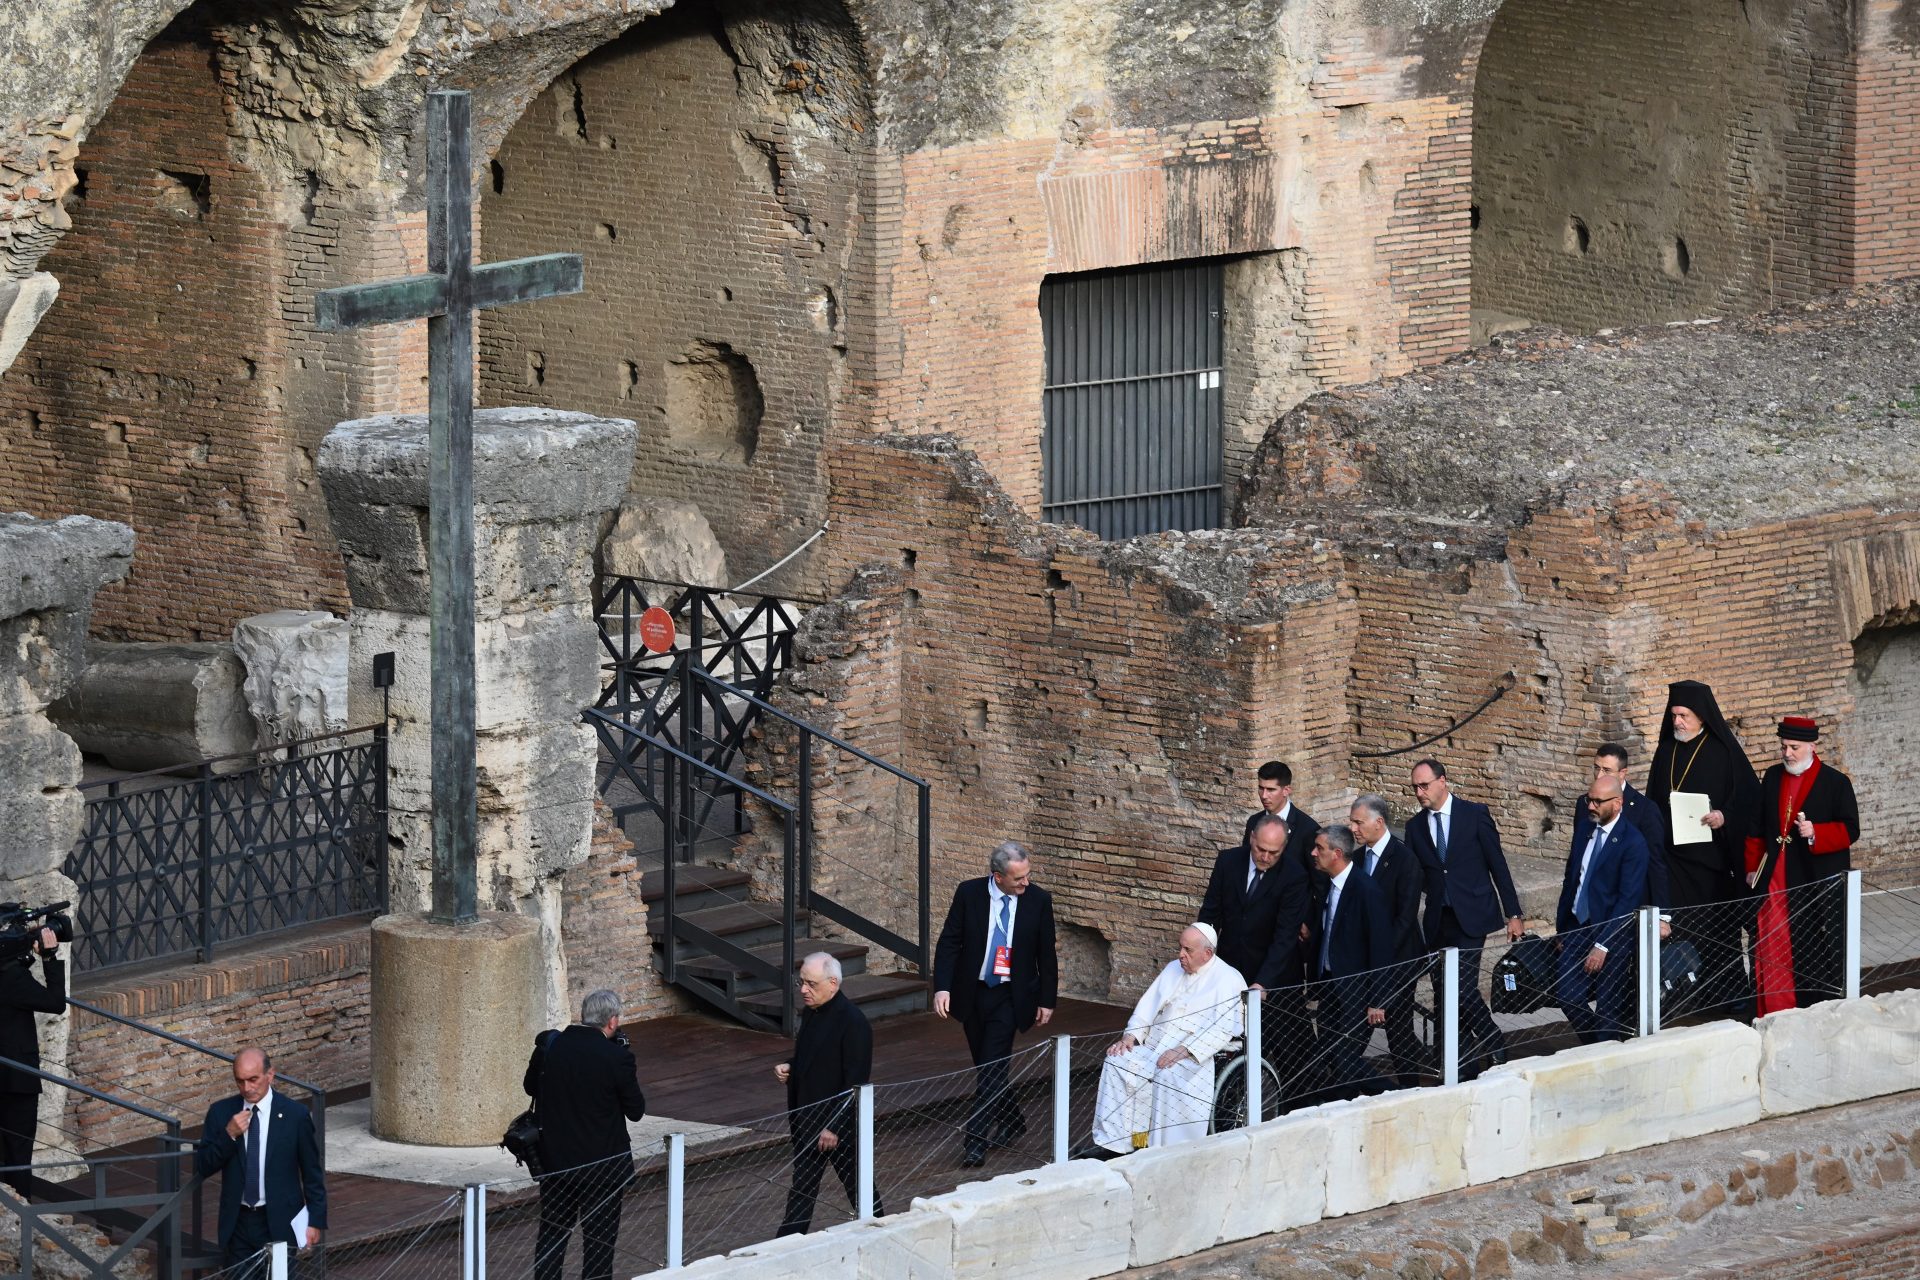 Pope Francis in a wheelchair at the Colisseum